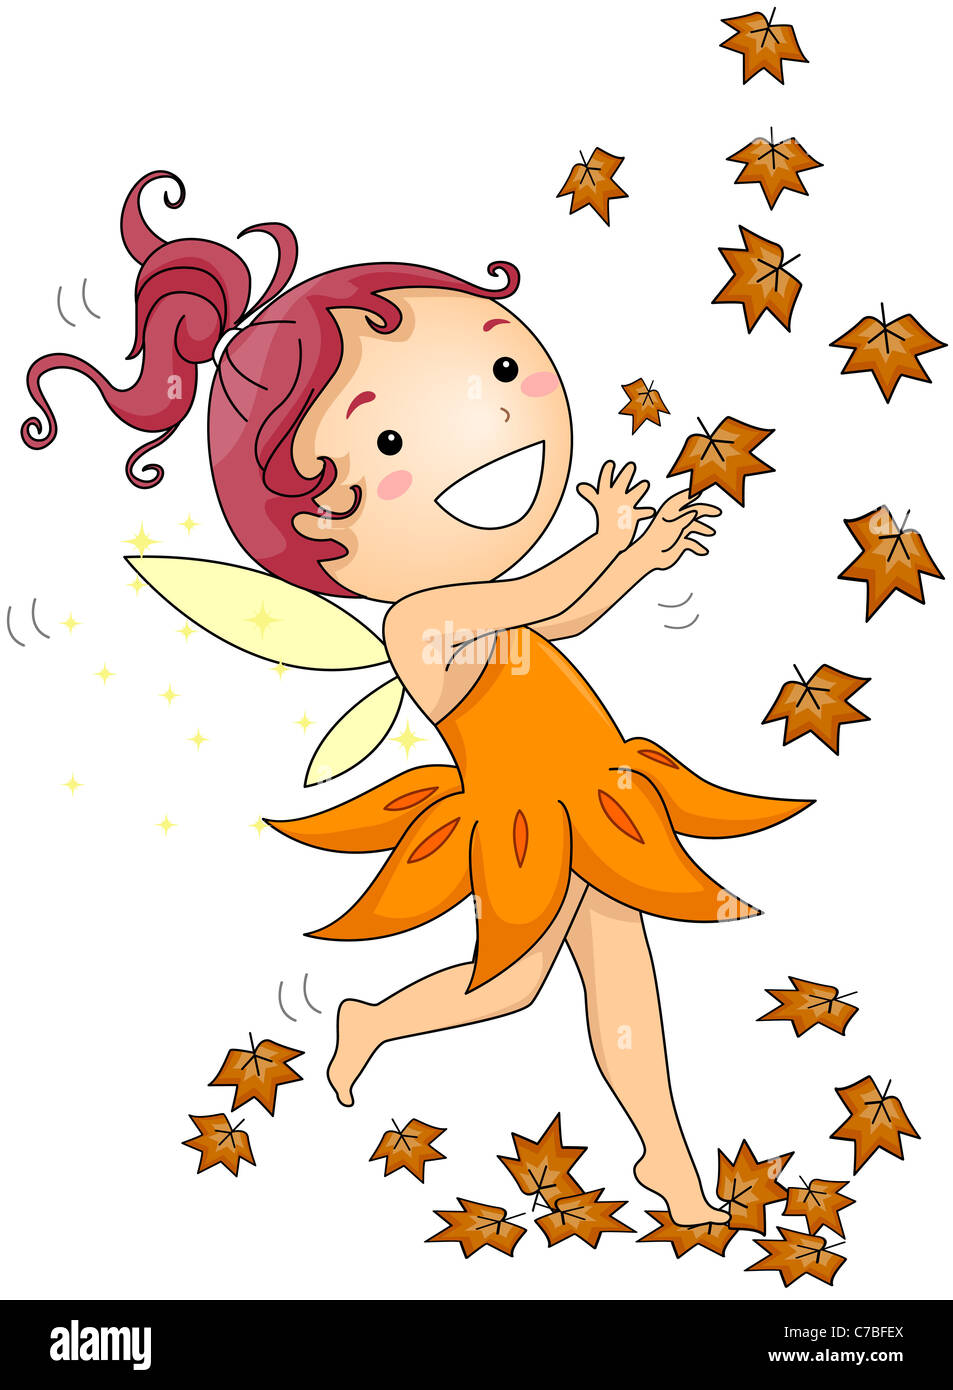 Illustration of an Autumn Fairy Playing with Dry Leaves Stock Photo